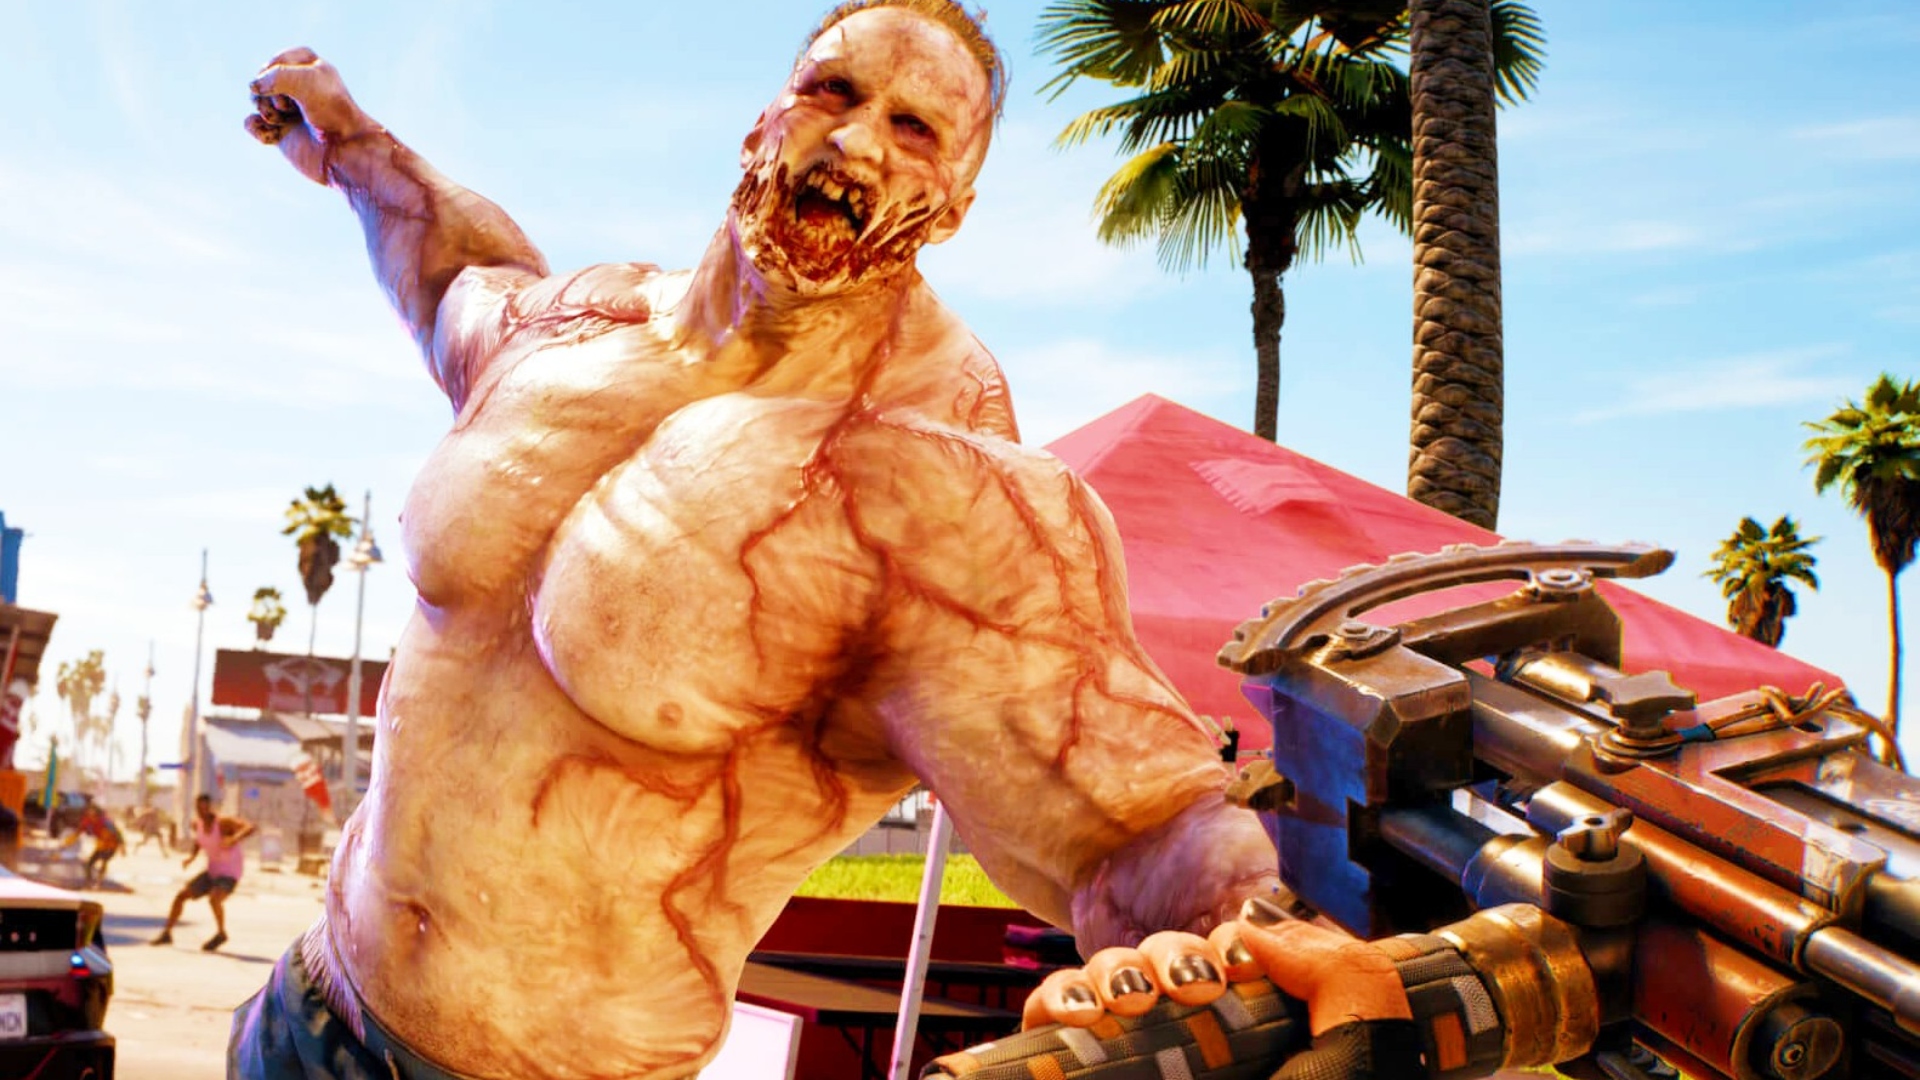 Dead Island 2 sale is already here, but you need to act now